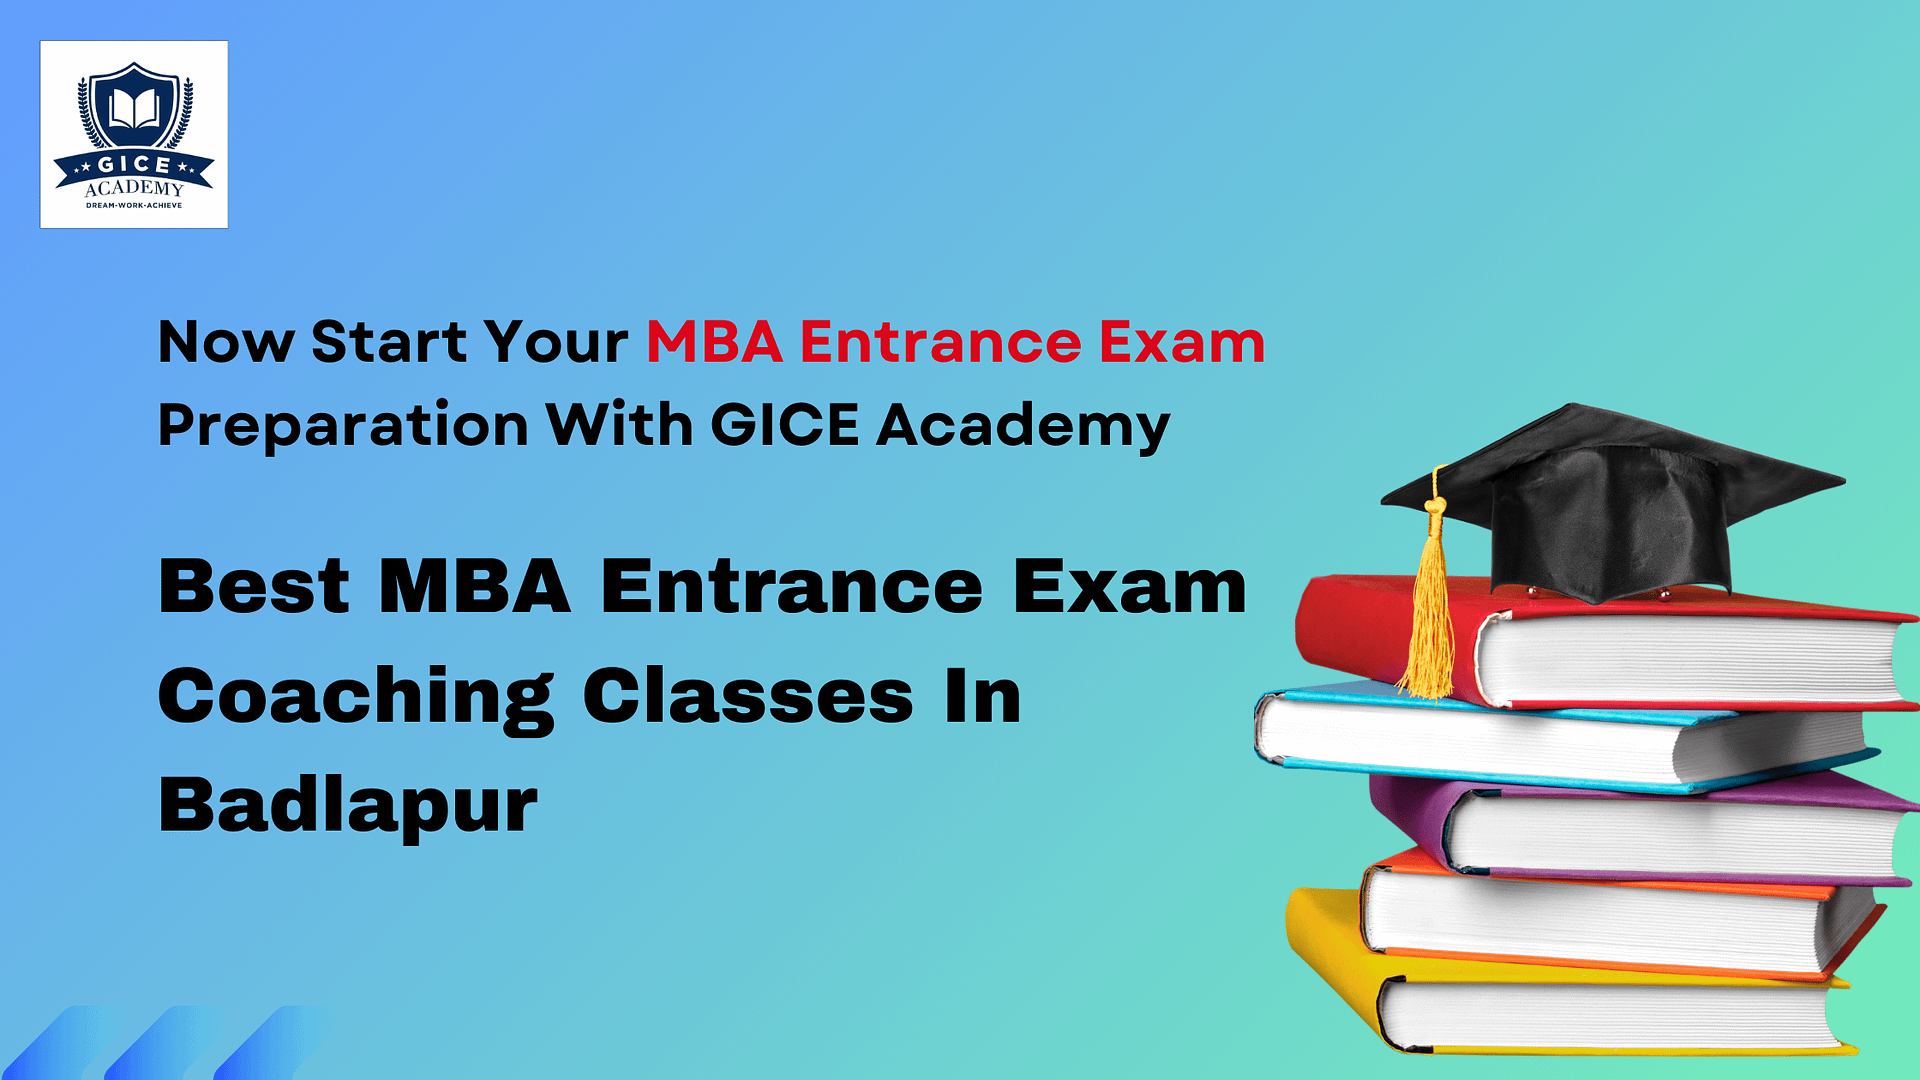 The Best MBA Entrance Exams Coaching Classes in Badlapur